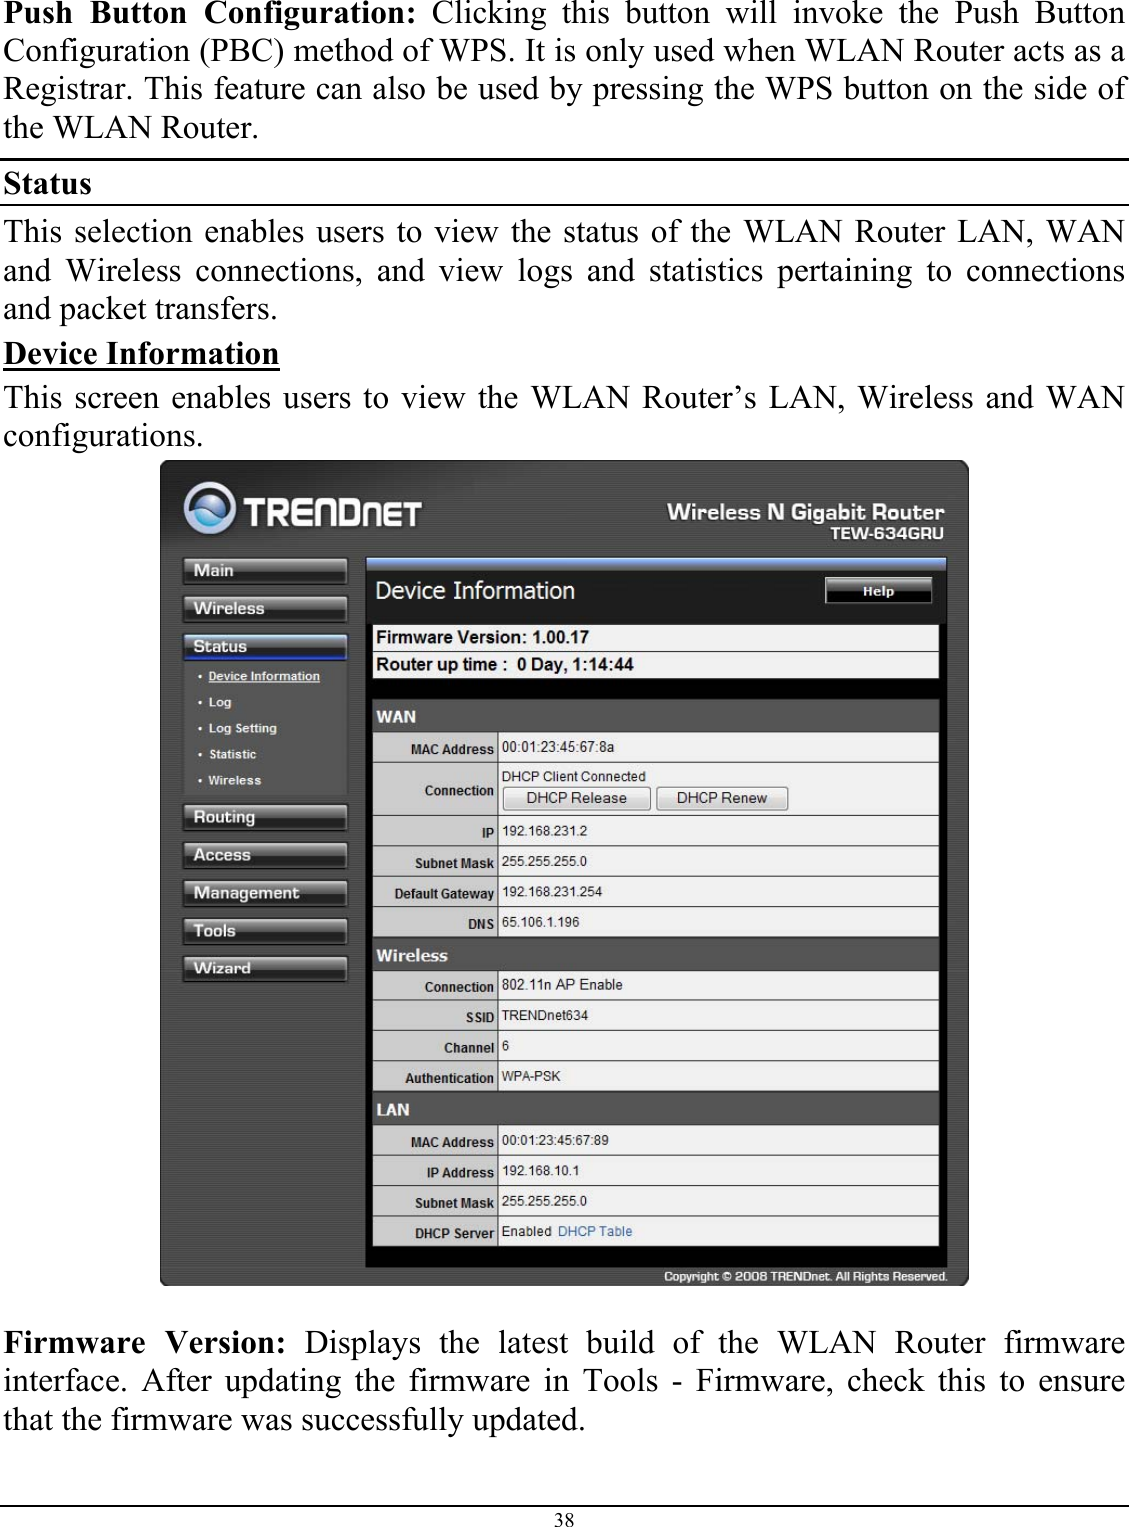 38  Push Button Configuration: Clicking this button will invoke the Push Button Configuration (PBC) method of WPS. It is only used when WLAN Router acts as a Registrar. This feature can also be used by pressing the WPS button on the side of the WLAN Router. Status This selection enables users to view the status of the WLAN Router LAN, WAN and Wireless connections, and view logs and statistics pertaining to connections and packet transfers. Device Information This screen enables users to view the WLAN Router’s LAN, Wireless and WAN configurations.   Firmware Version: Displays the latest build of the WLAN Router firmware interface. After updating the firmware in Tools - Firmware, check this to ensure that the firmware was successfully updated. 